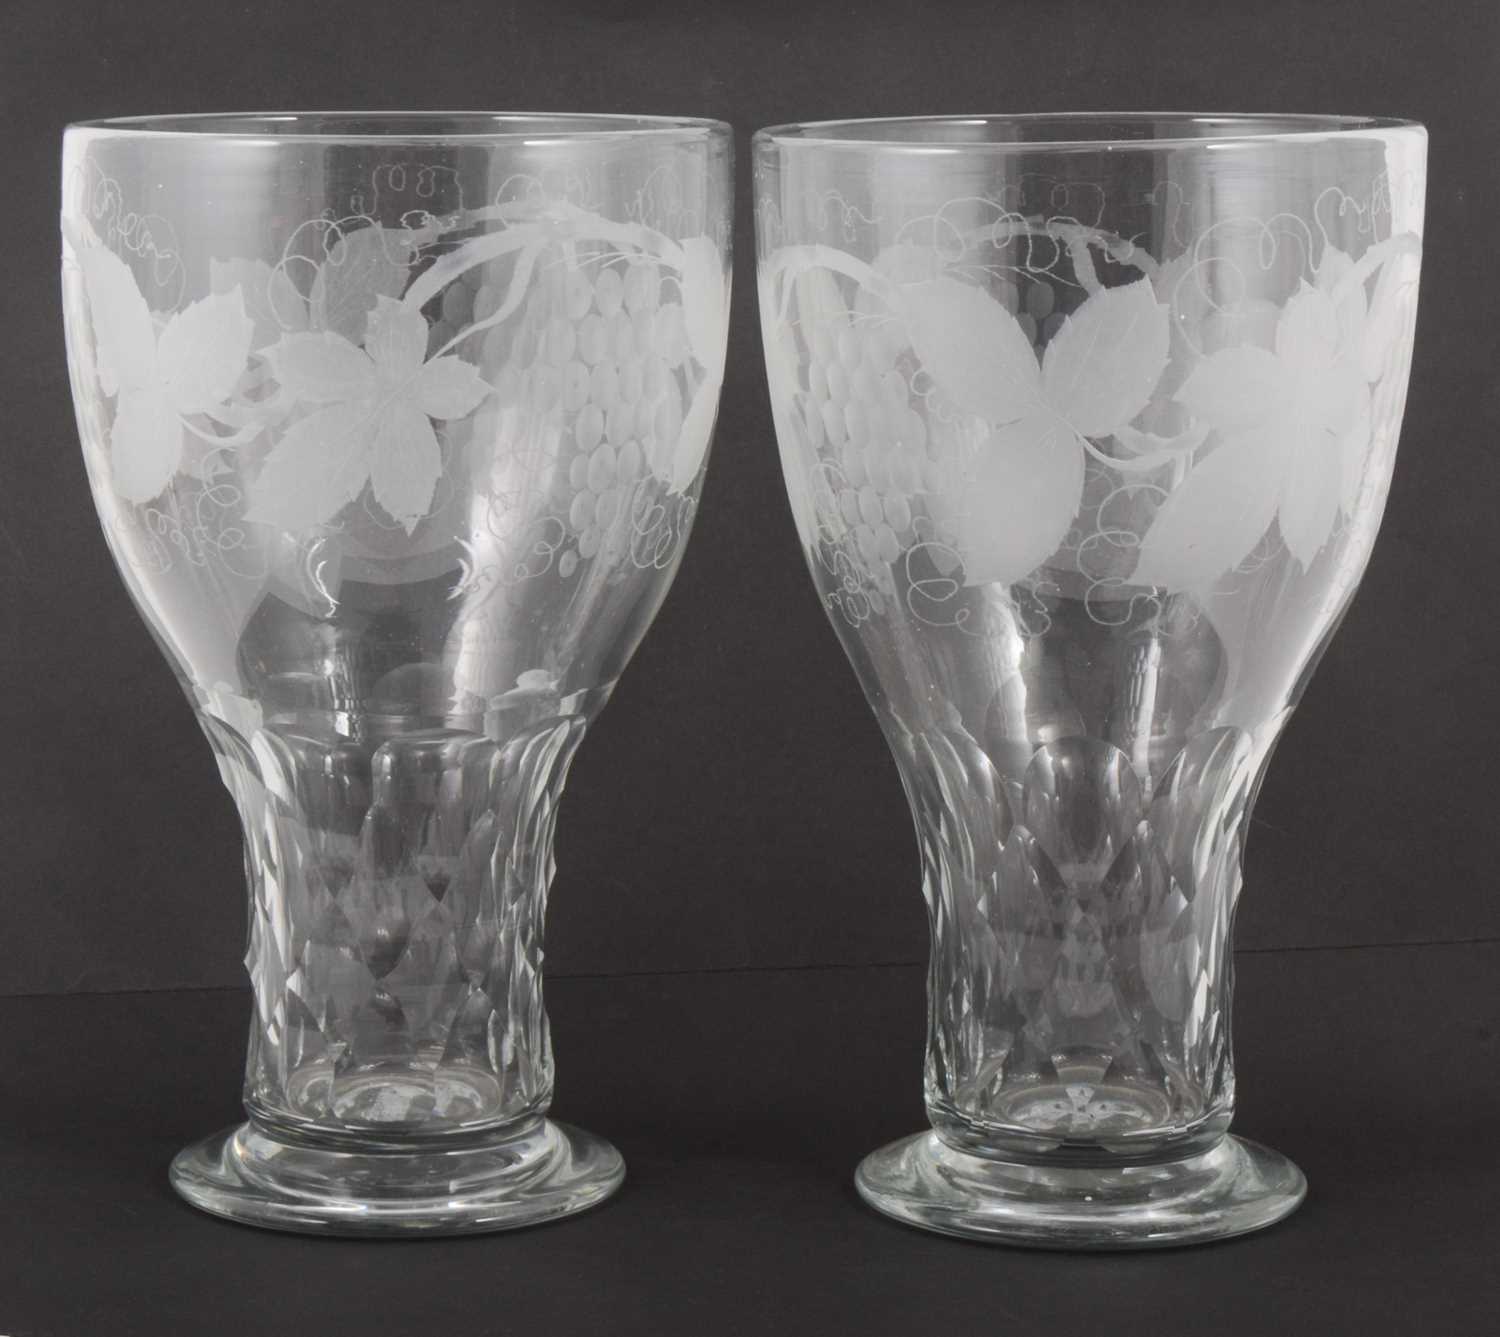 Lot 62 - A pair of oversized cut glass goblet-shaped vases, circa 1900